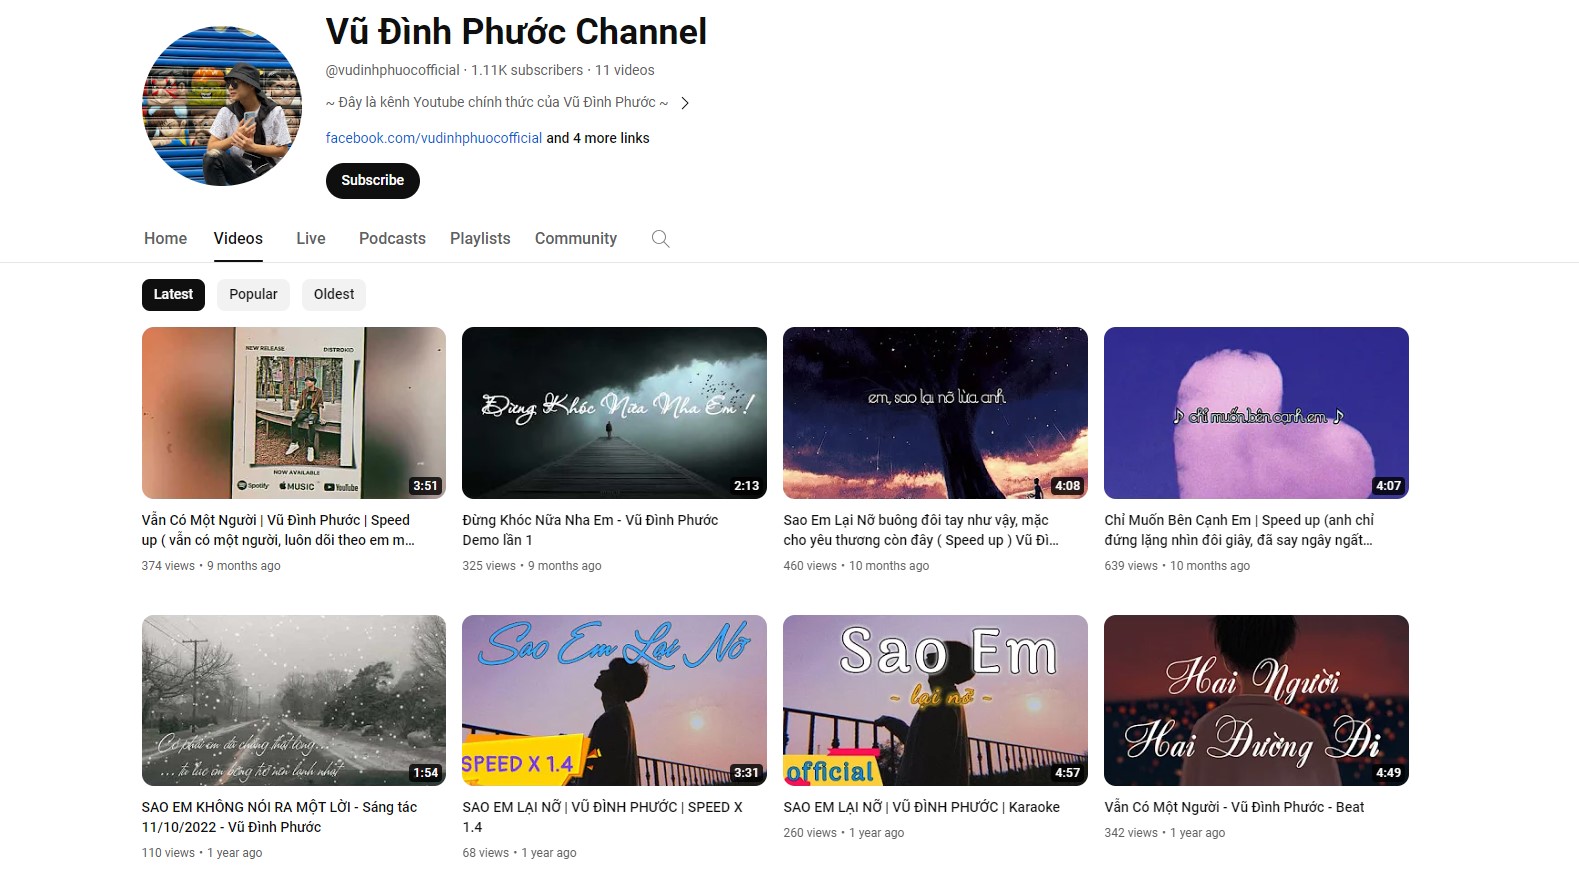 YouTube channel Vu Dinh Phuoc operates independently and distributes music himself  